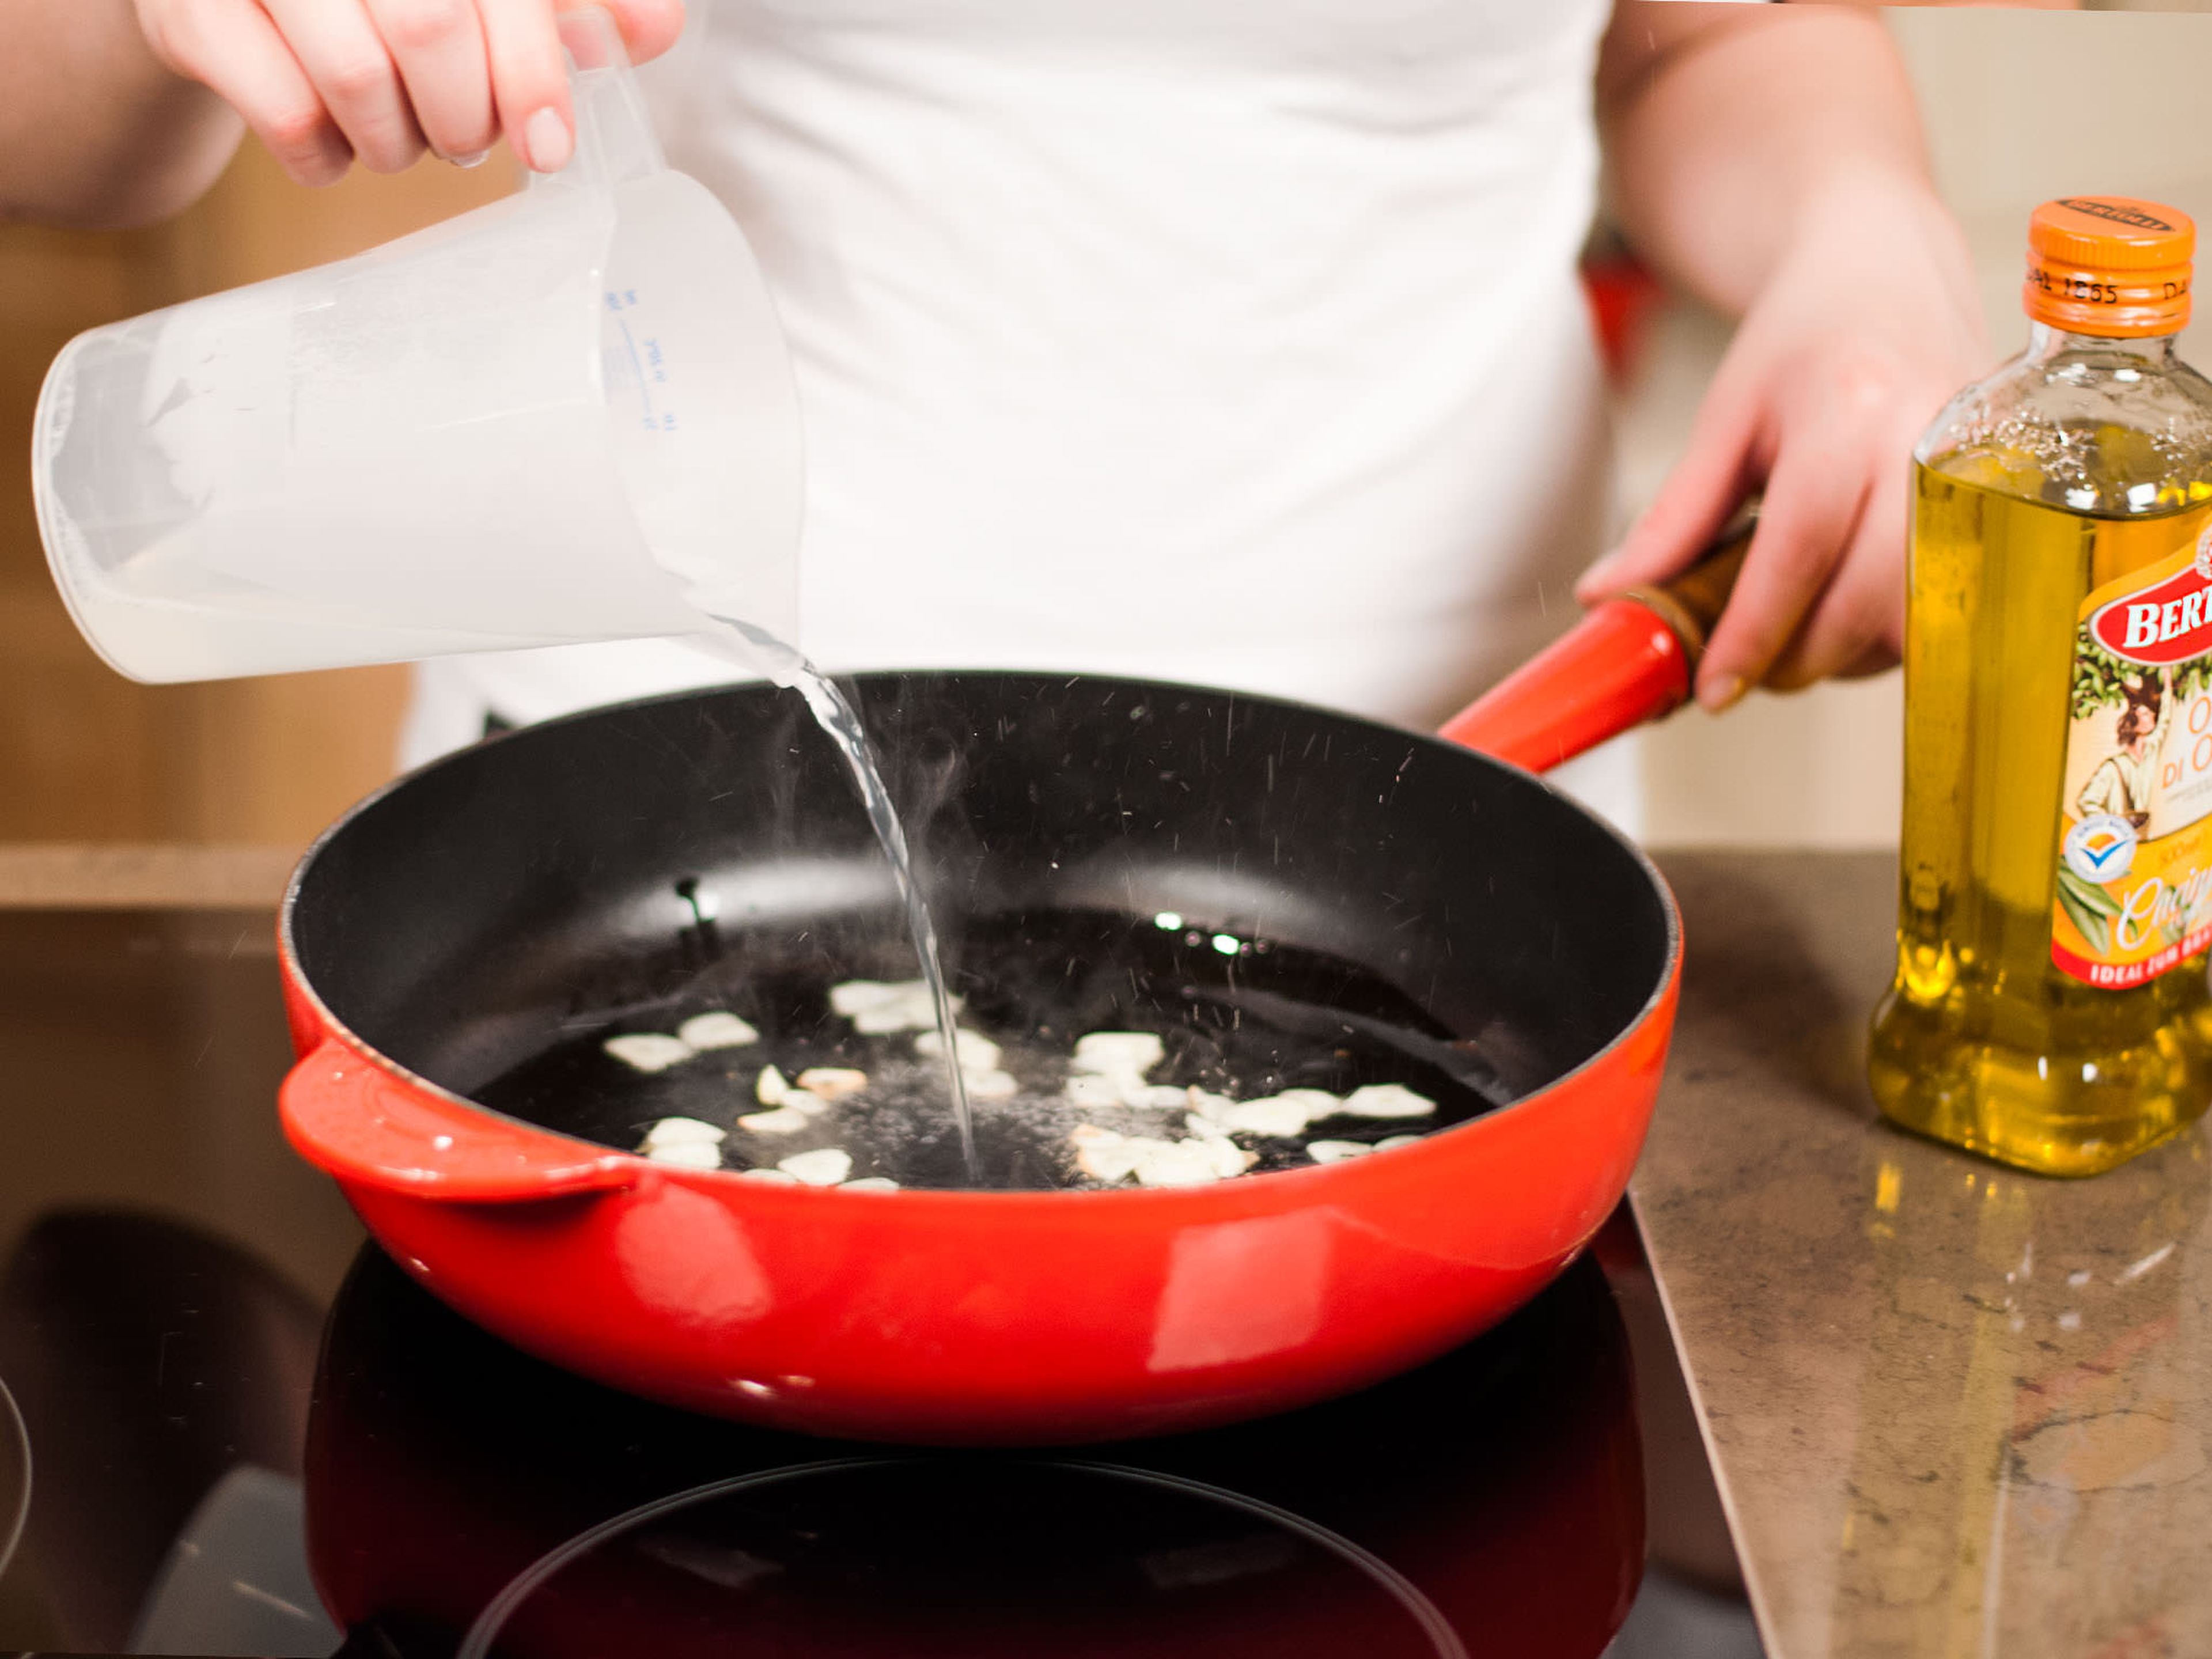 Heat up olive oil in a frying pan. Sauté garlic for approx. 1 – 2 min. Pour in pasta water.